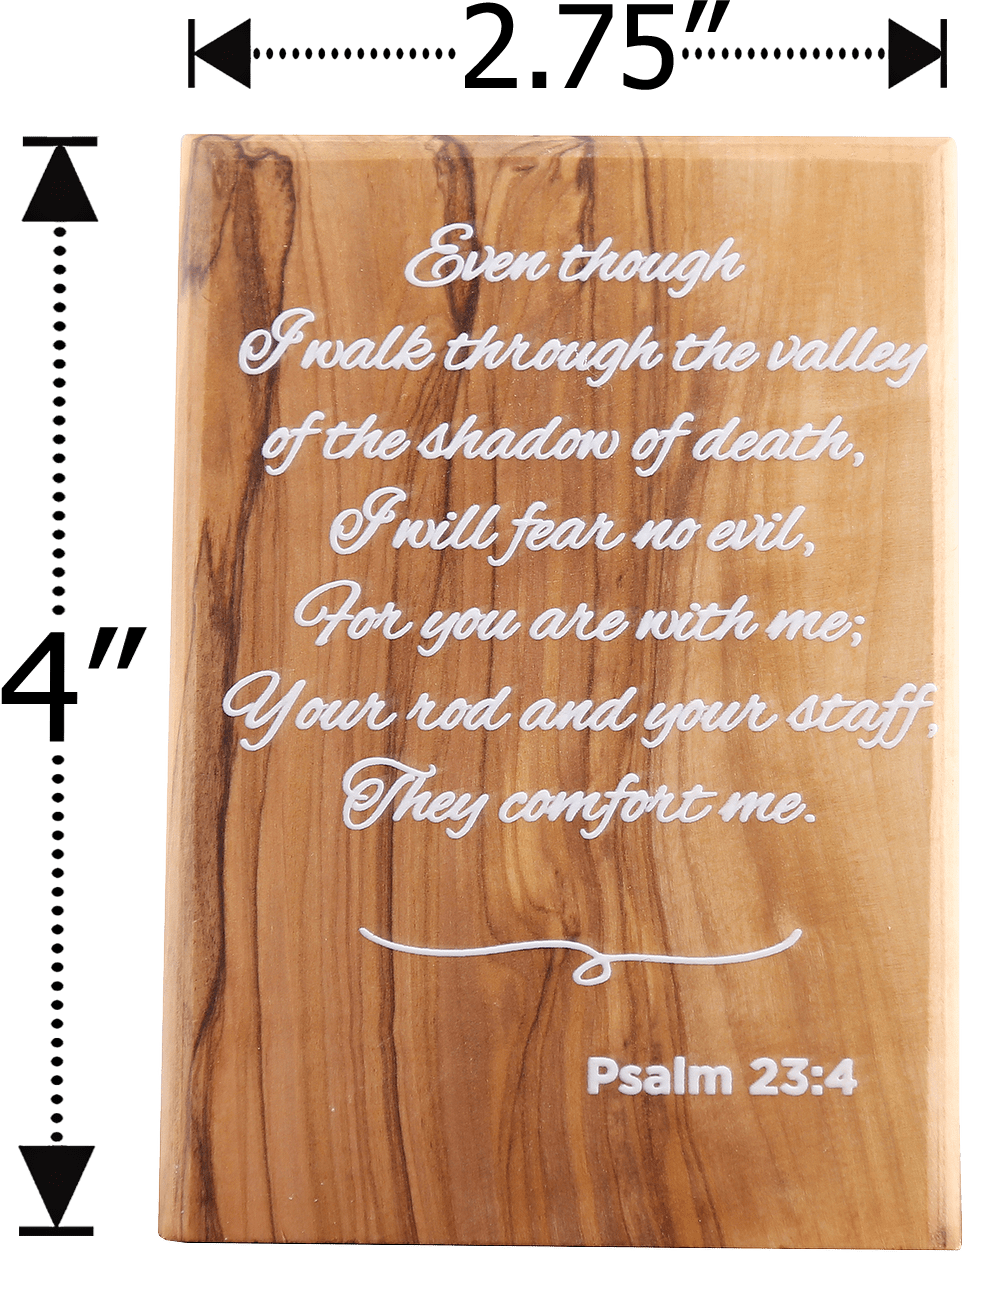 Olive Wood Plaque with White Print #1, Psalm 23:4